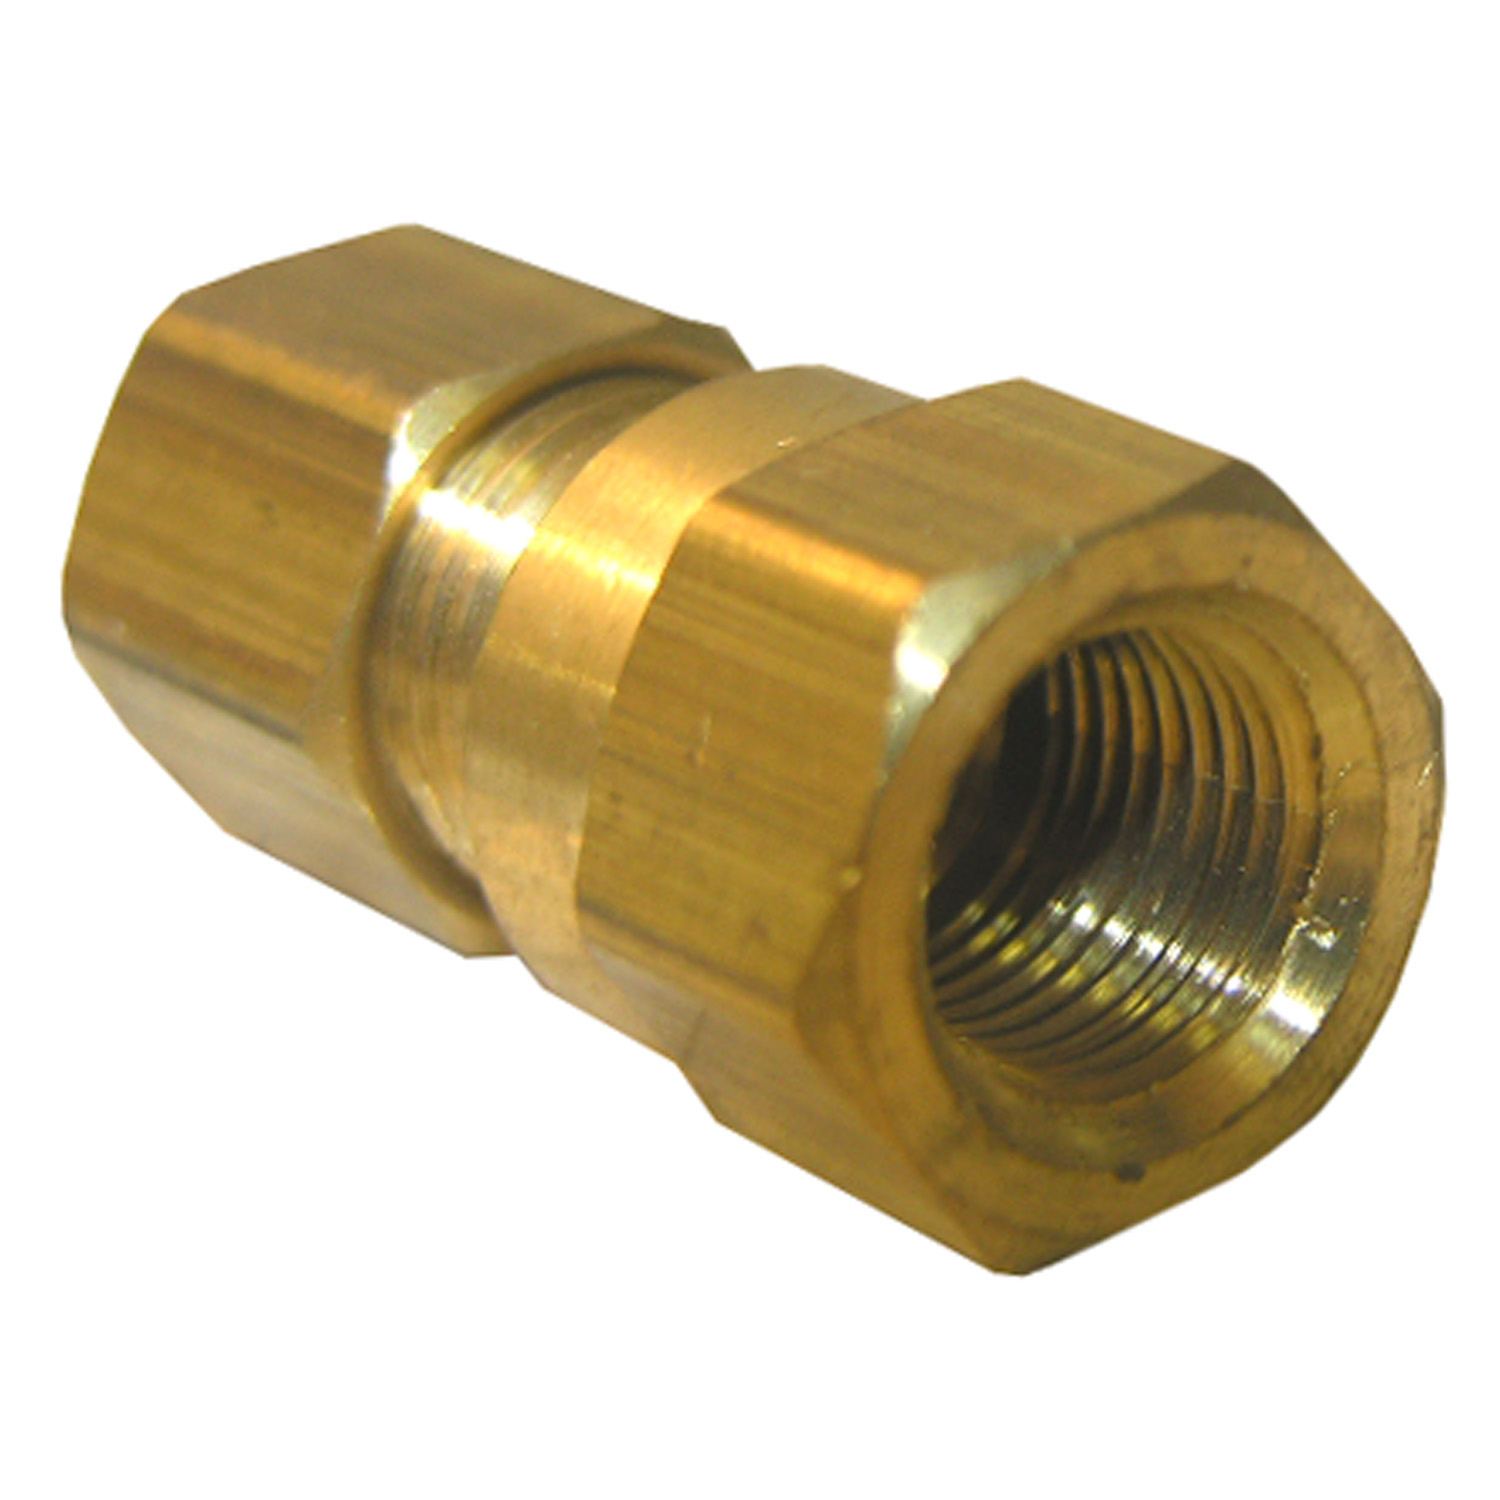 17-6611 Pipe Adapter, 1/4 x 1/8 in, Compression x FPT, Brass, 150 psi Pressure